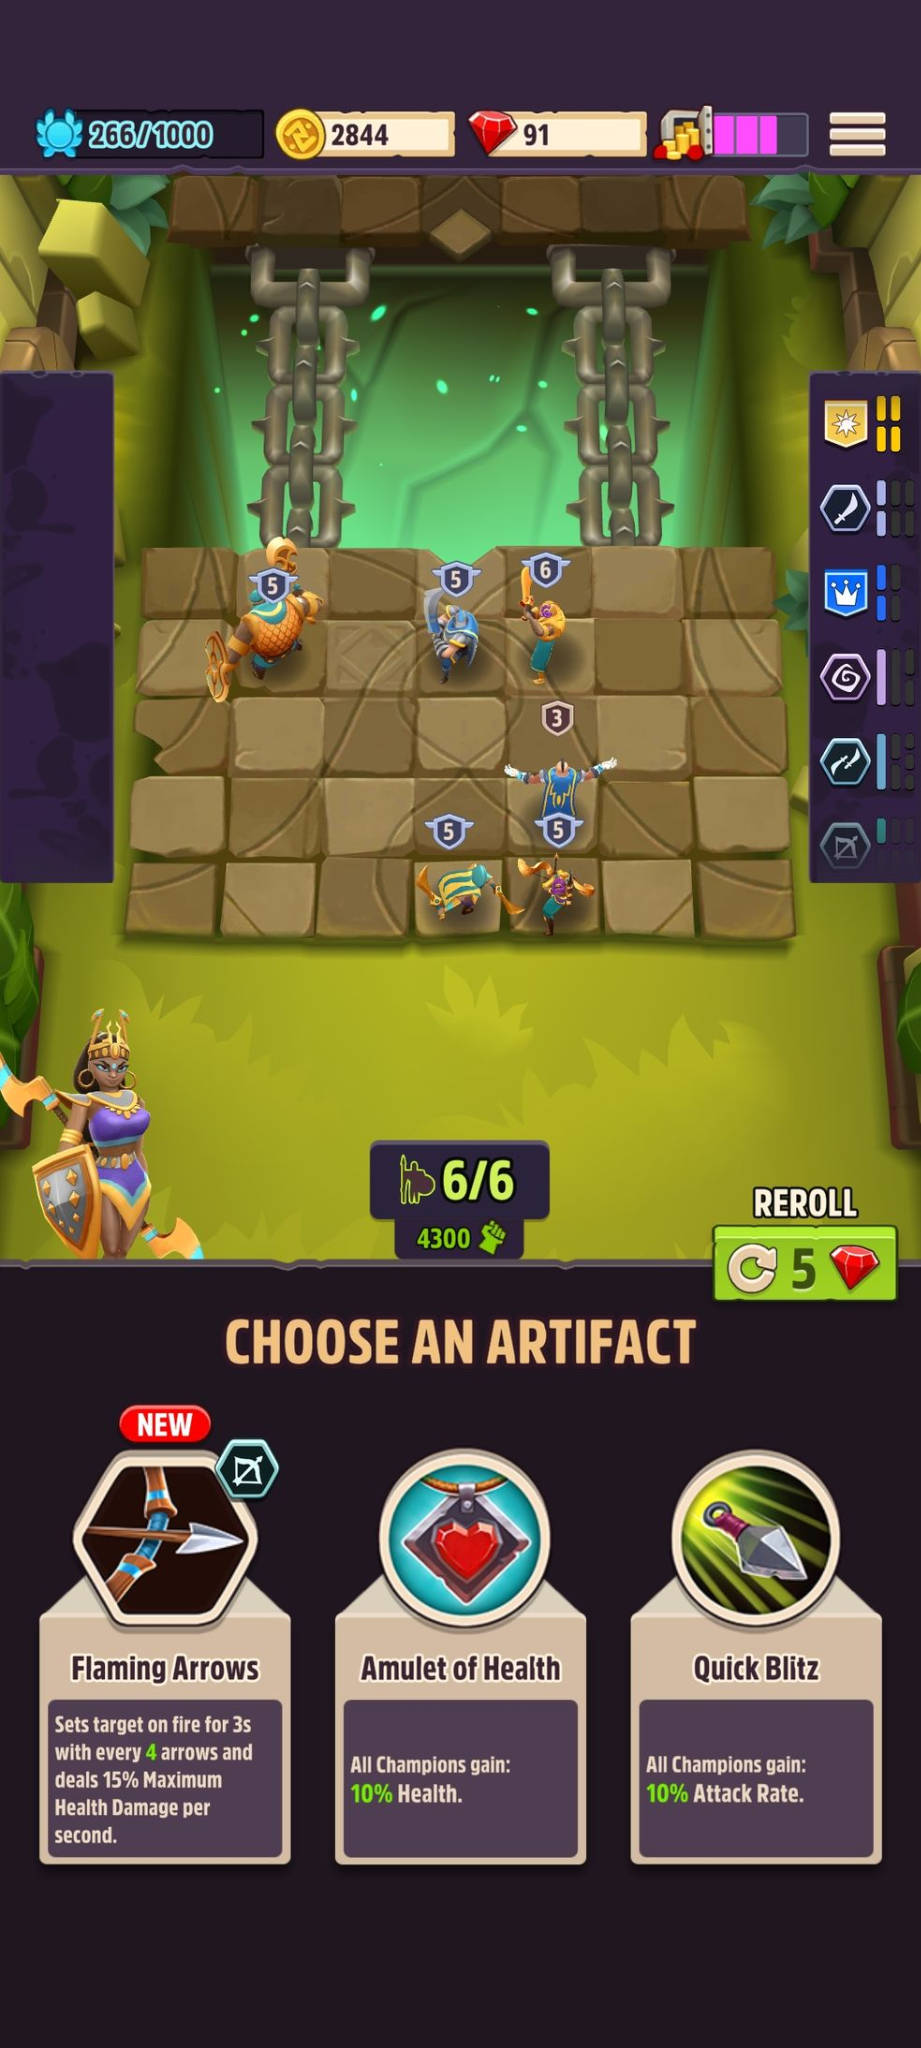 Chess Rush Comparison to Other Auto Battler like Dota Underlords